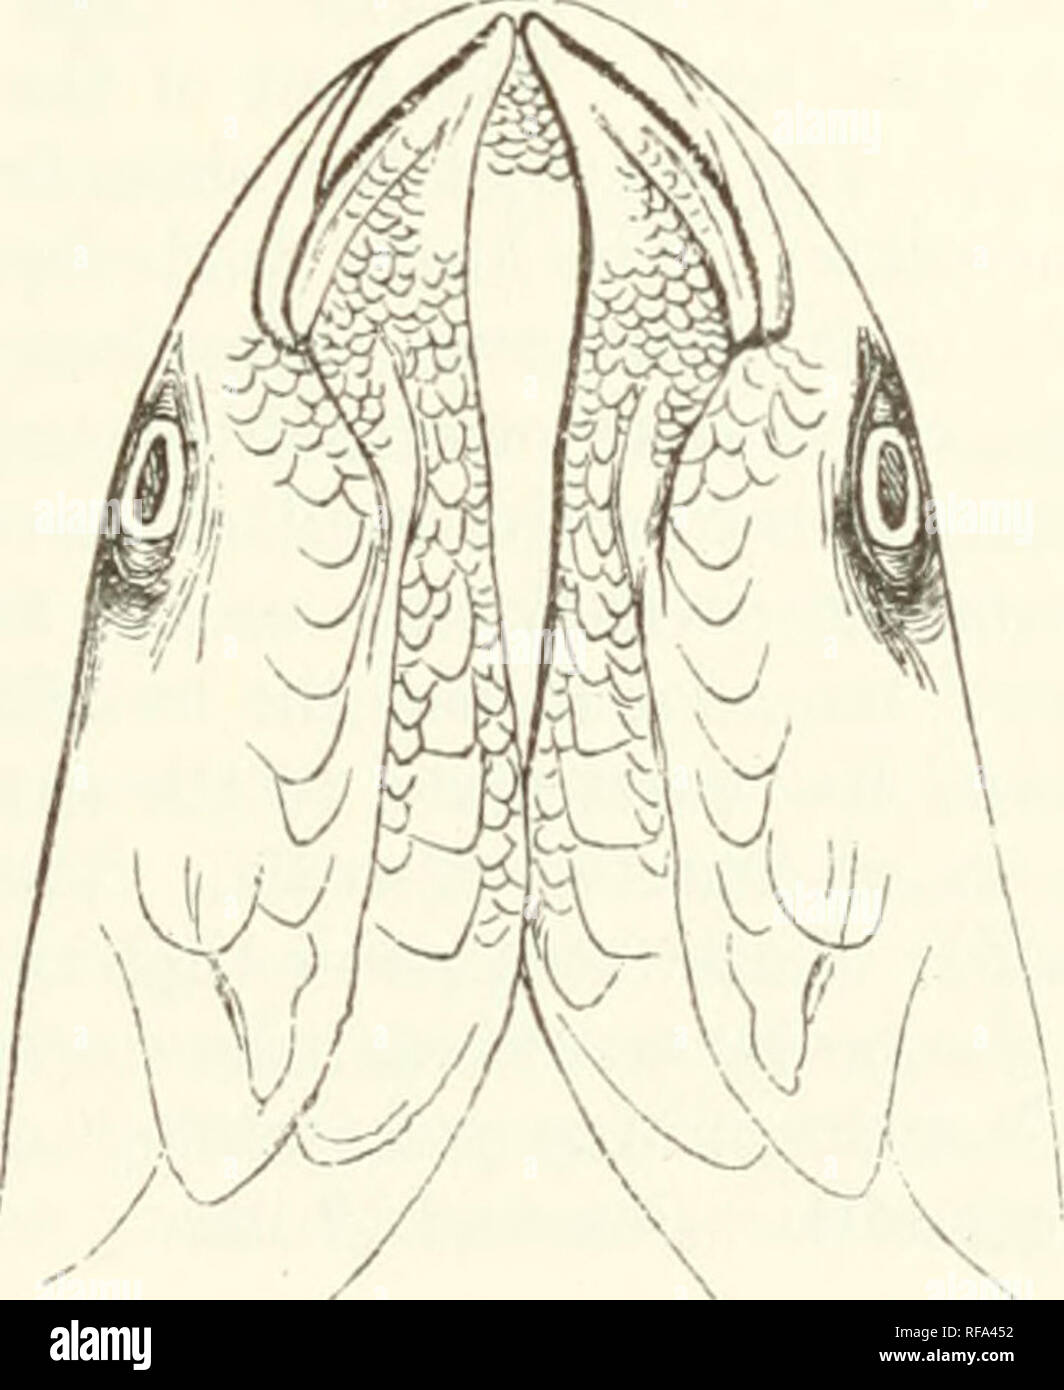 . Catalogue of the fishes in the British Museum. British Museum (Natural History); Fishes. 1. MTTGIL. 419 from the dorsal fin than to the base of the pectoral. Shining stripes along the series of scales. Fresh waters of the Cape of Good Hope. a. Twenty-one inches long : stnifed. Cape. From Sir A. Smith's Collection. b. Half-grown. Cape.—^The upper lip of this specimen is slightly villose, as is shown in the woodcut. c. d. Adult and half-grown: stuffed. Cape. e. Young. Cape. Presented by Sir A. Smith. /. Adult: stuffed. From the Collection of the East India Company. 4. Mugil cephalotus. ?Renard Stock Photo